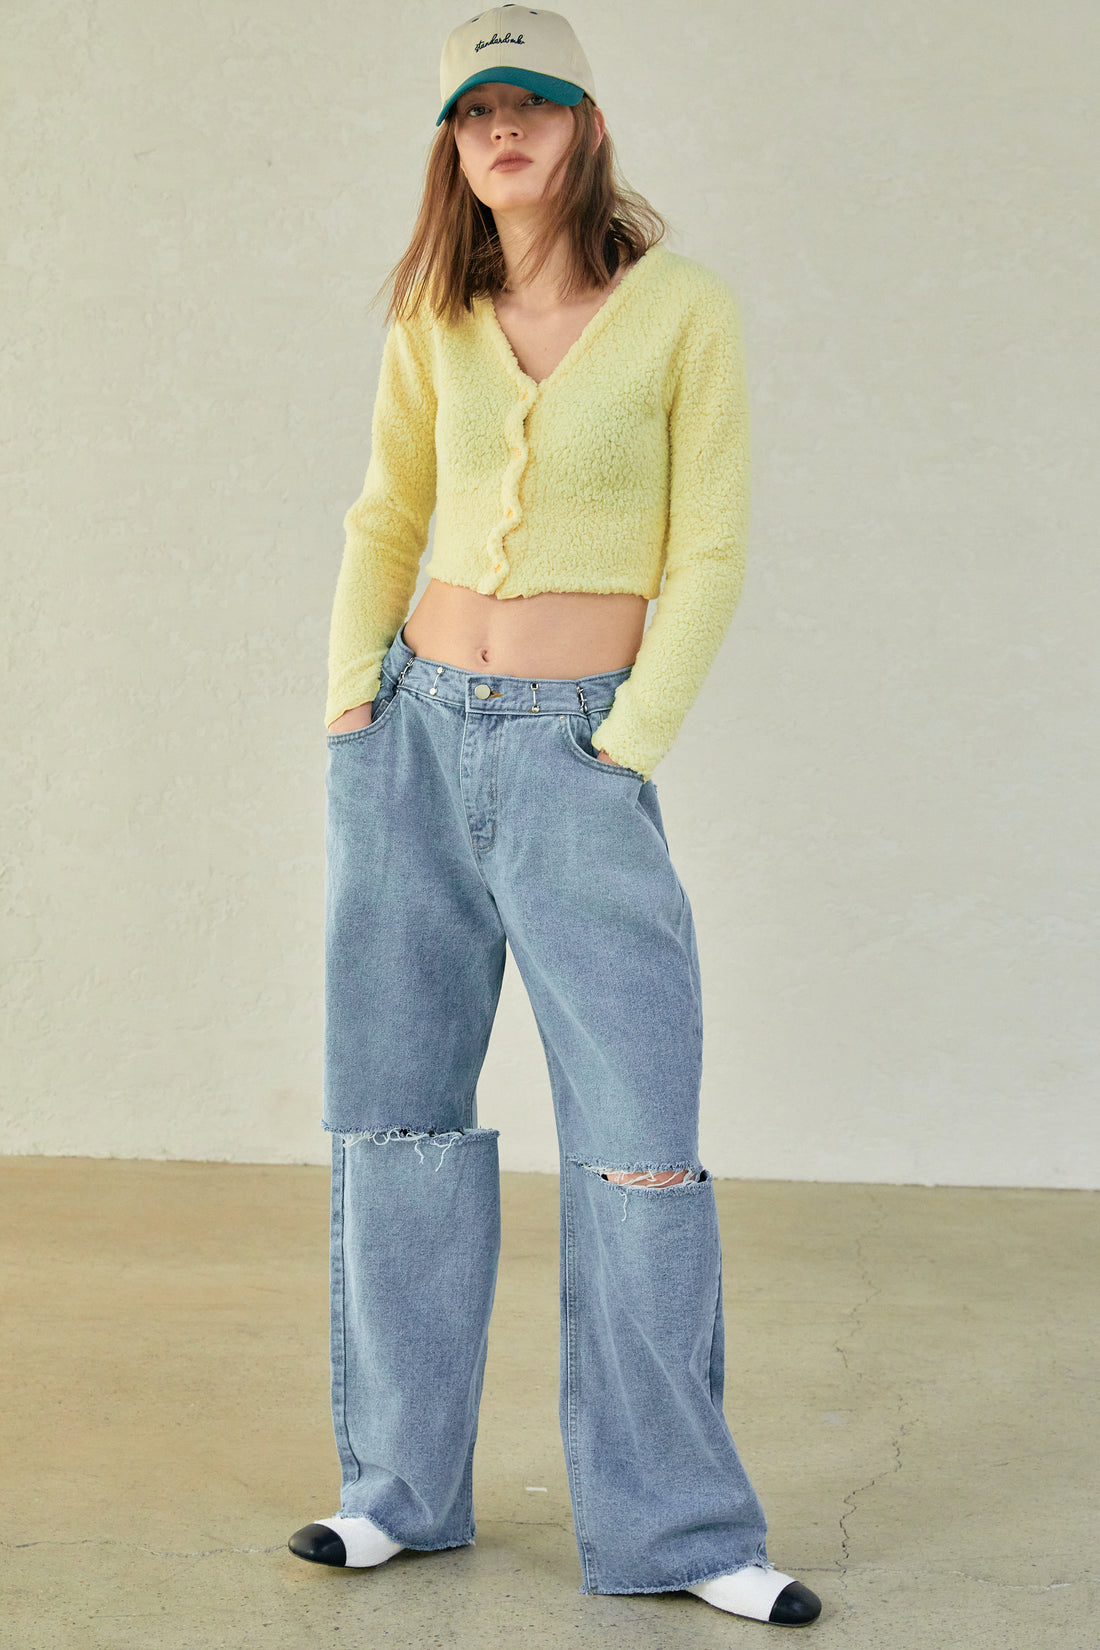 Wide Leg Ripped Jeans, Blue – SourceUnknown